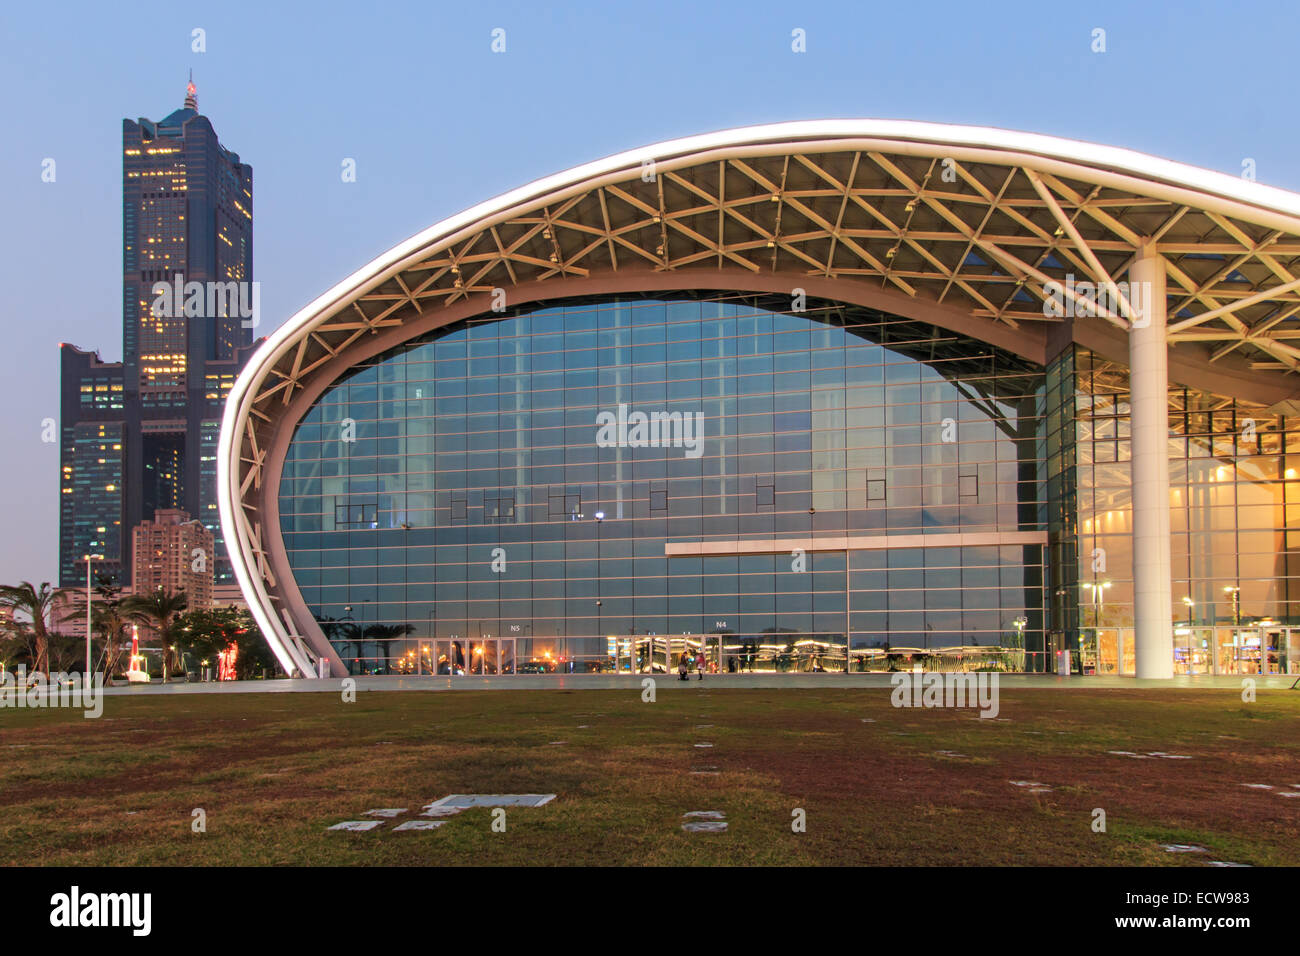 Kaohsiung, Taiwan - December 18, 2014: The newly opened Kaohsiung Exhibition Center and the 85 Building on background. Stock Photo